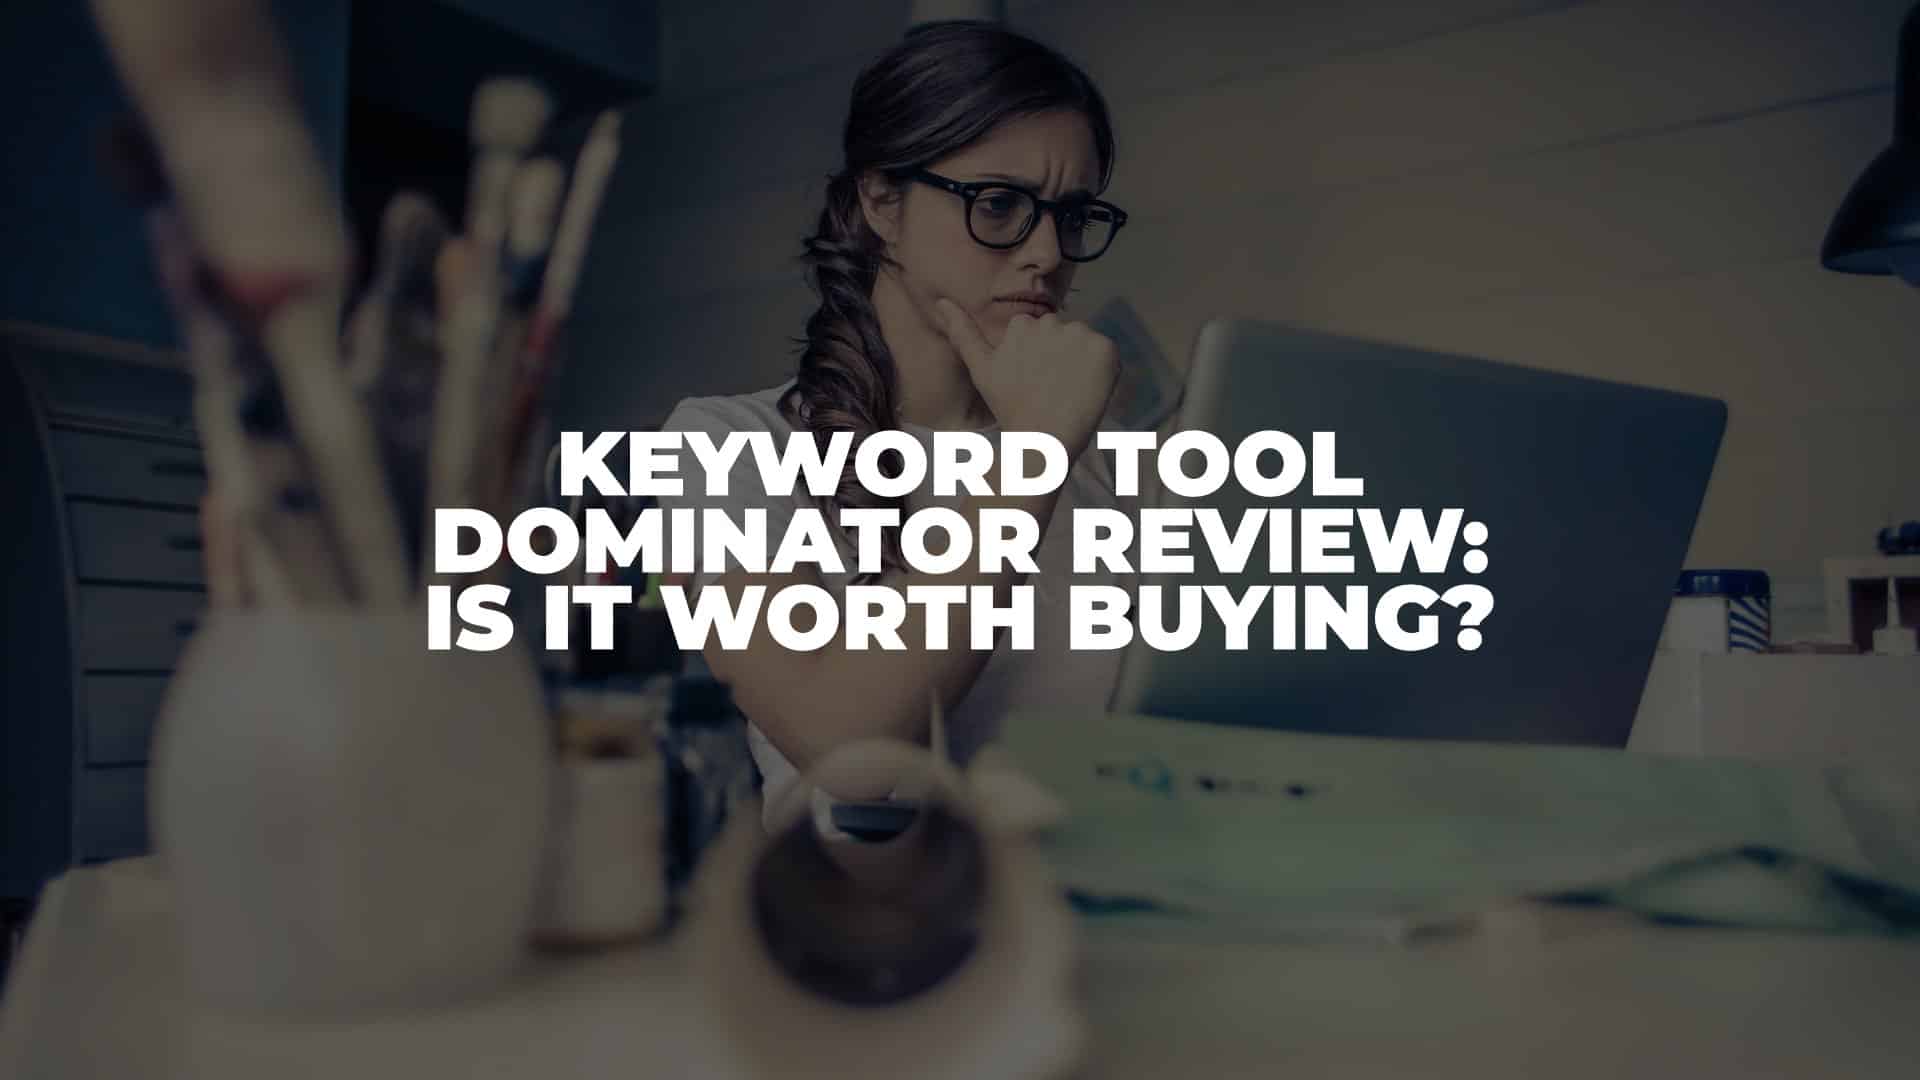 Keyword Tool Dominator Review - Featured Image